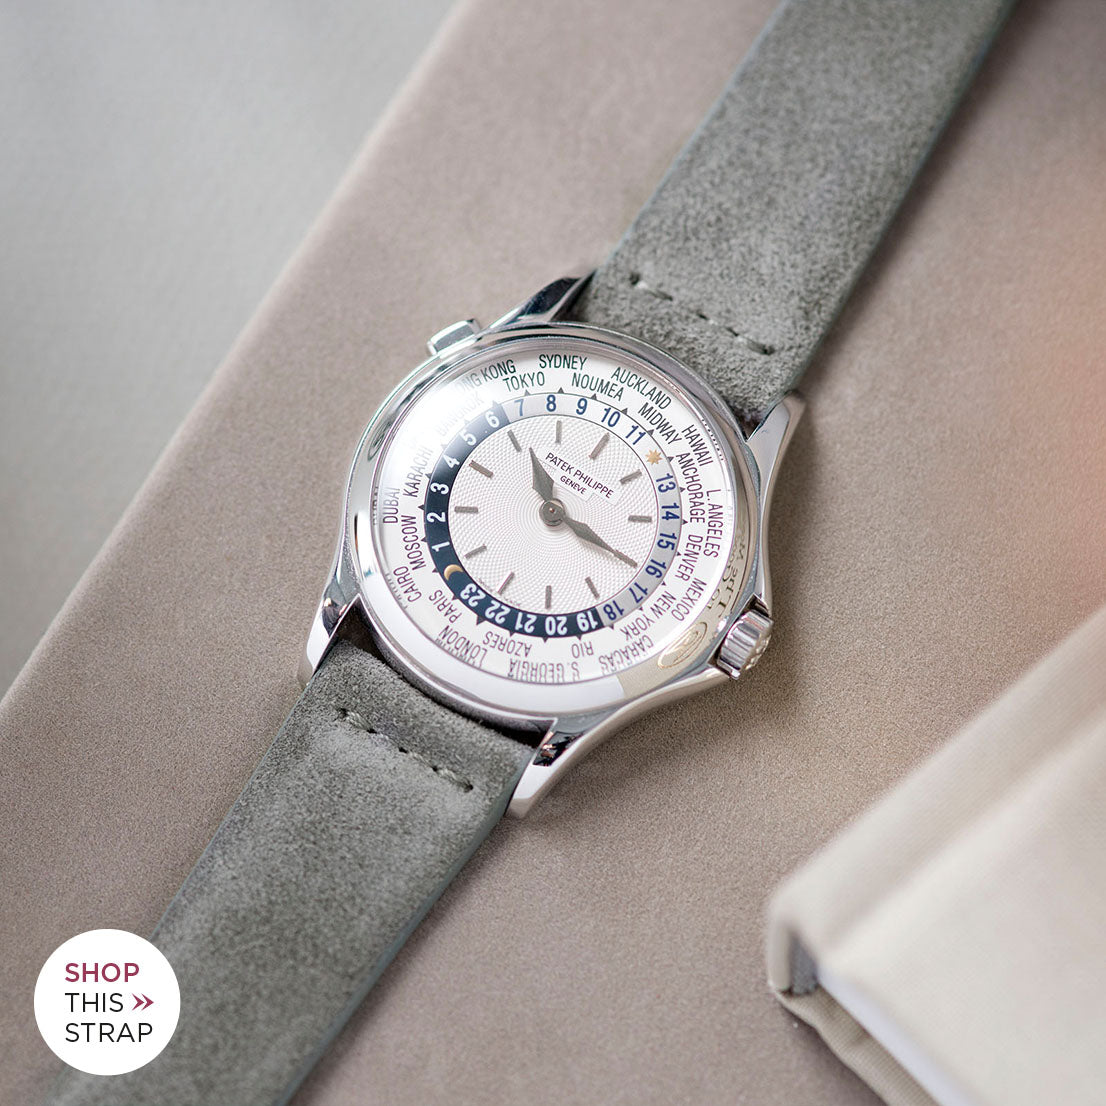 Bulang and Sons_Strap Guide _Patek Philippe 5110G White Gold World Time_Grey Silky Suede Leather Watch Strap